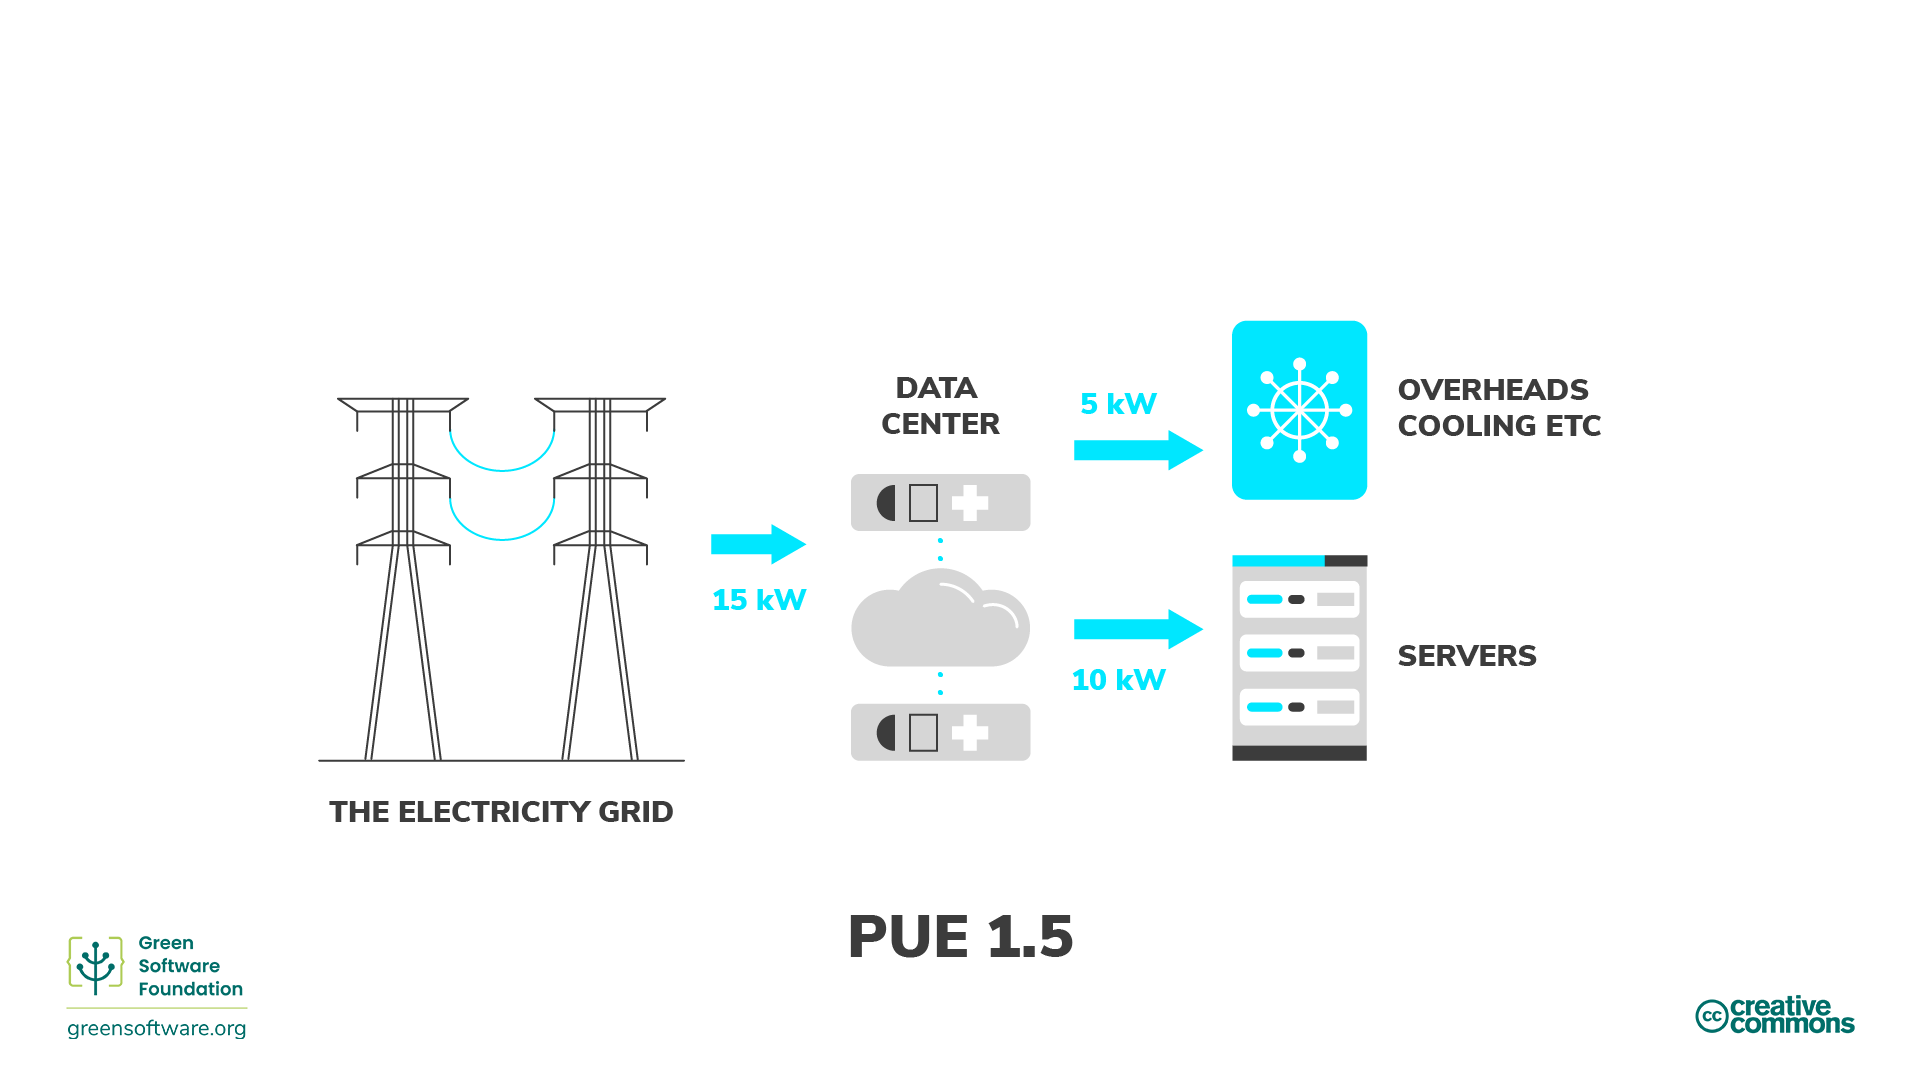 Infographic by the Green Software Foundation explaining Power Usage Effectiveness (PUE) in a data center. The flow chart depicts the journey of electricity from the grid to the data center, highlighting servers and overheads such as cooling. The PUE value is shown as 1.5